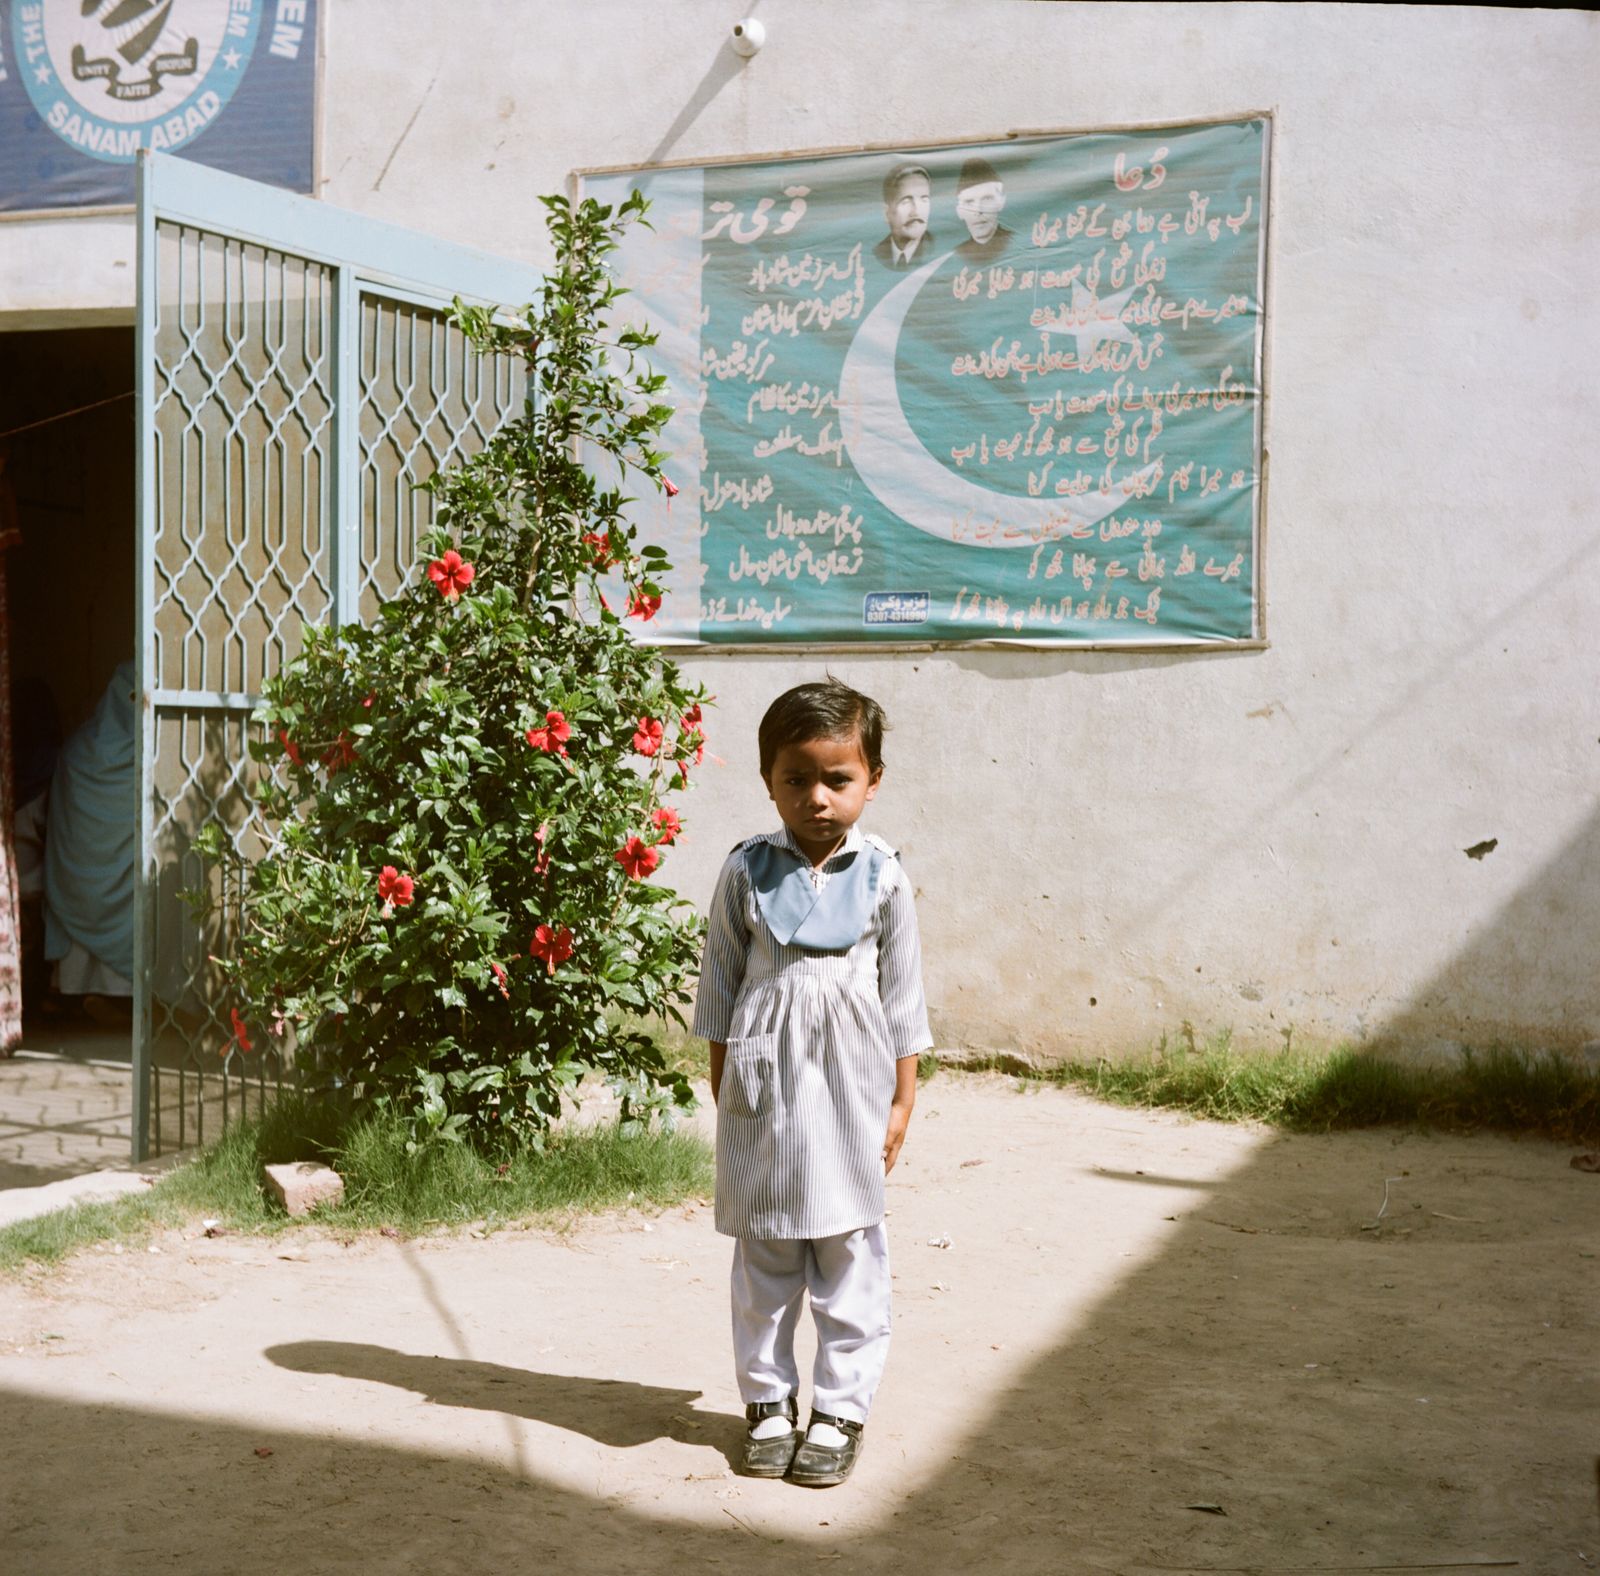 © Maryam Wahid - Image from the Ek Aurat Ka Safar (translating to: a woman's journey) photography project